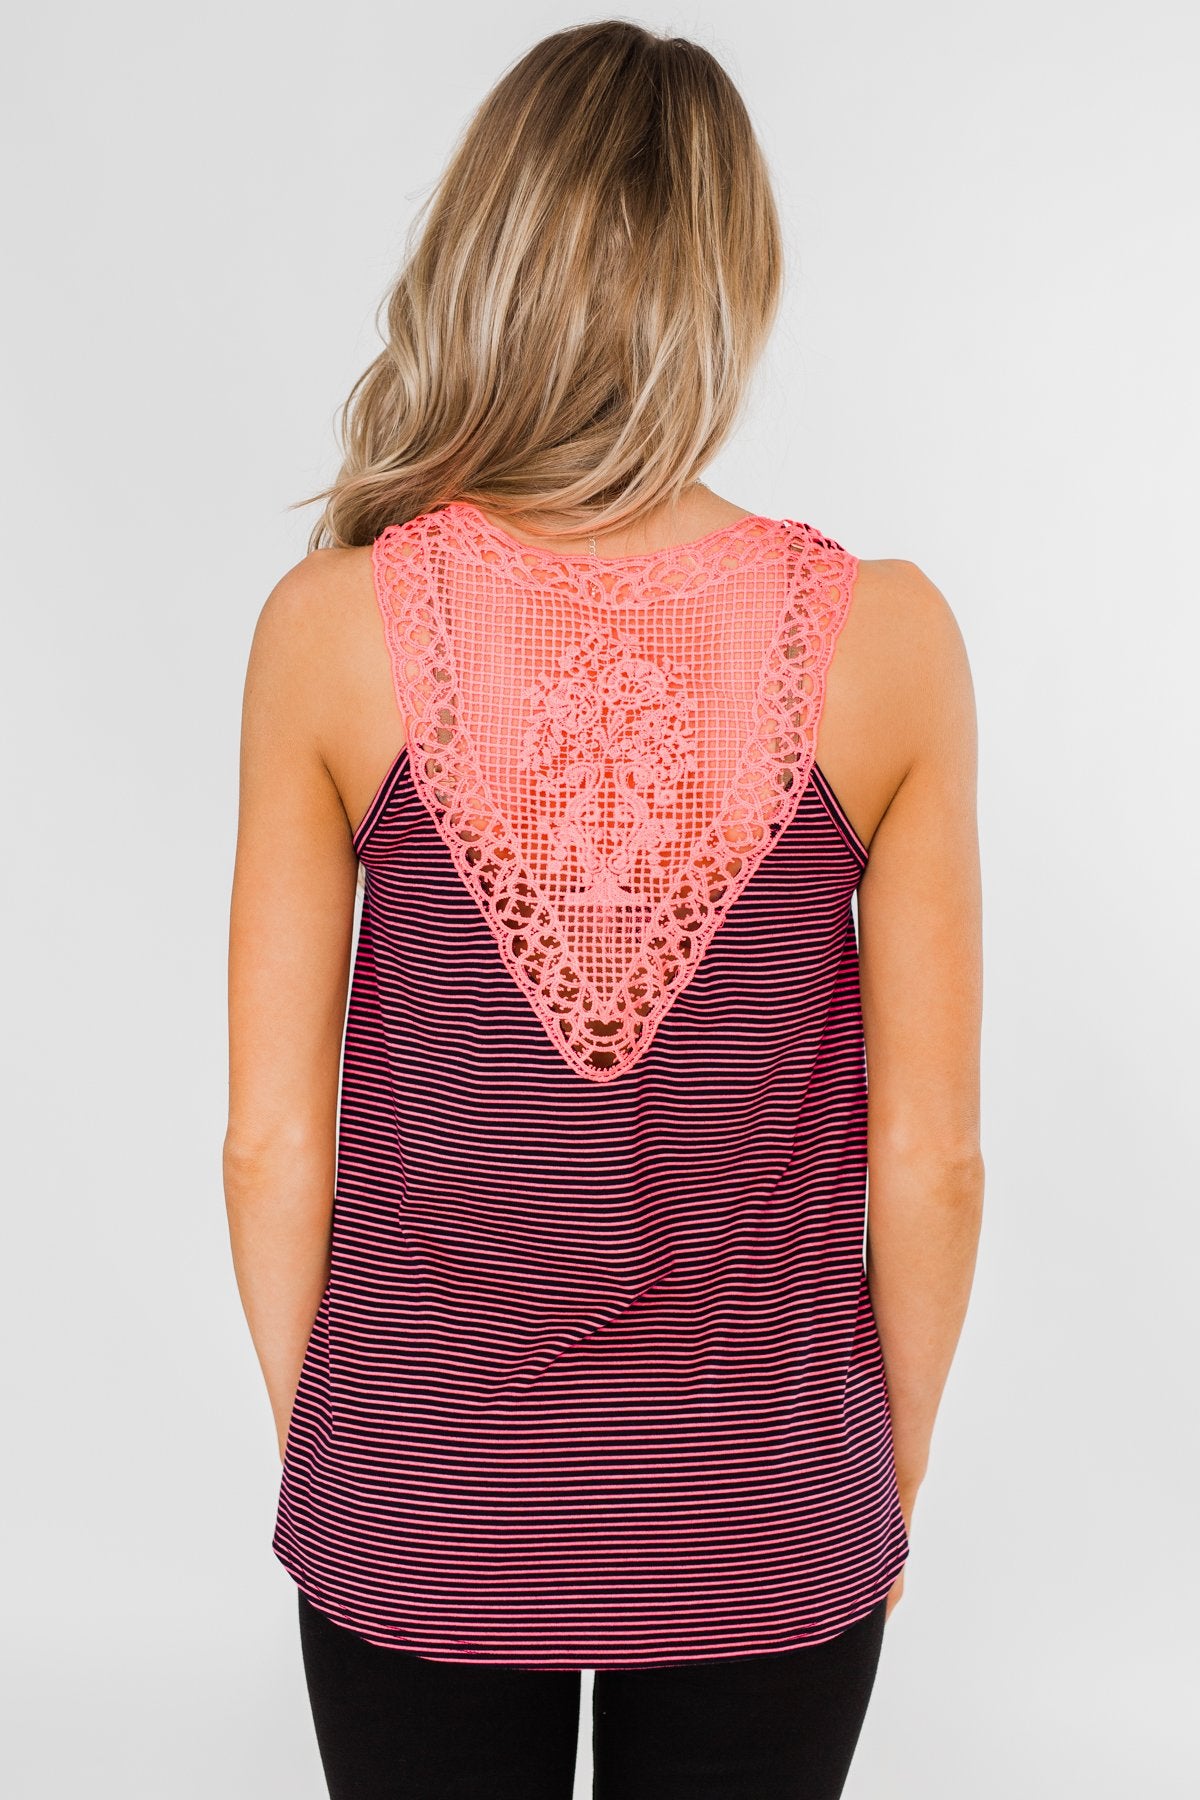 Striped Lace Racerback Tank Top- Neon Pink & Black – The Pulse Boutique